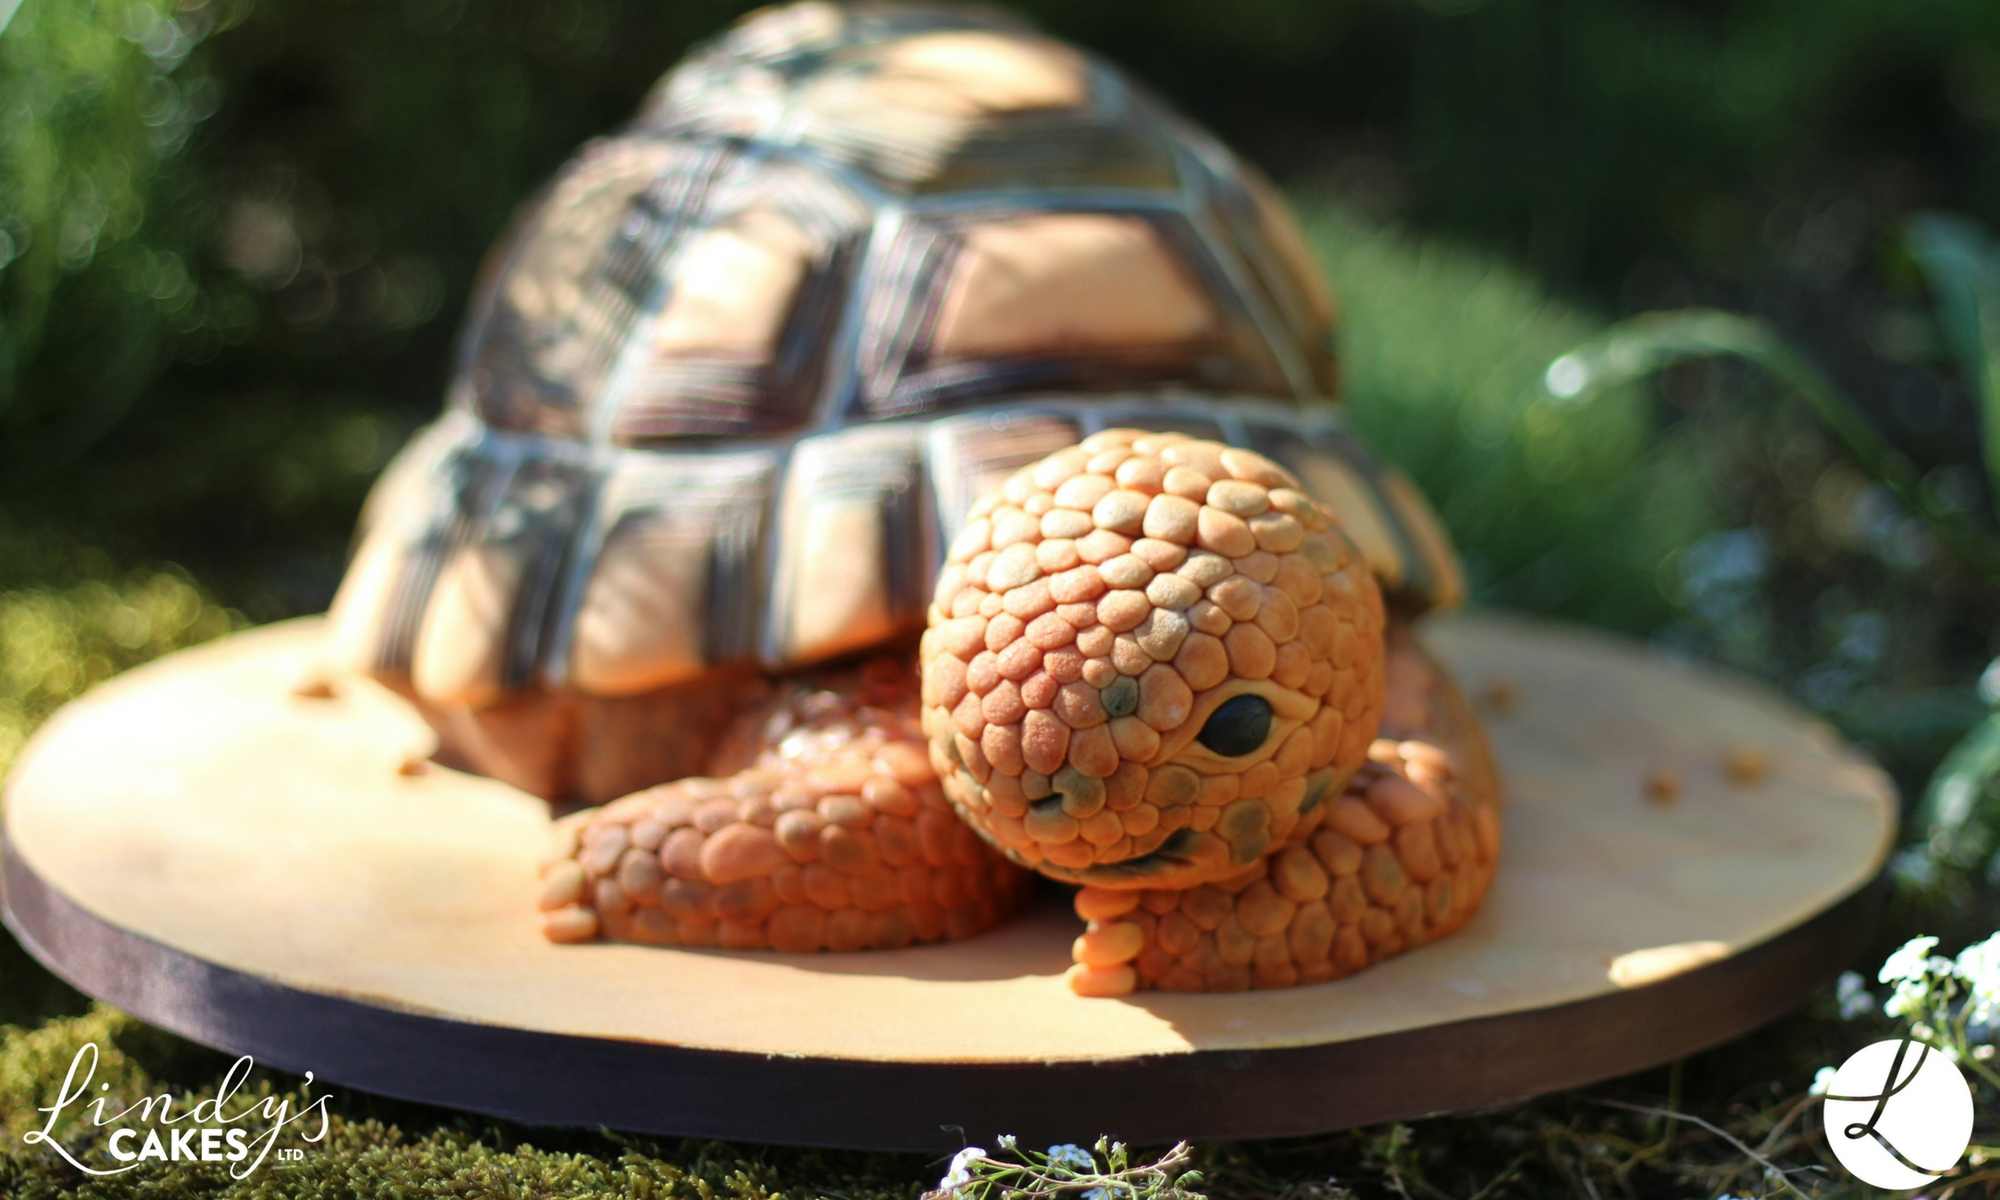 tortoise cake from 'Party animal cakes' book by best-selling author Lindy Smith